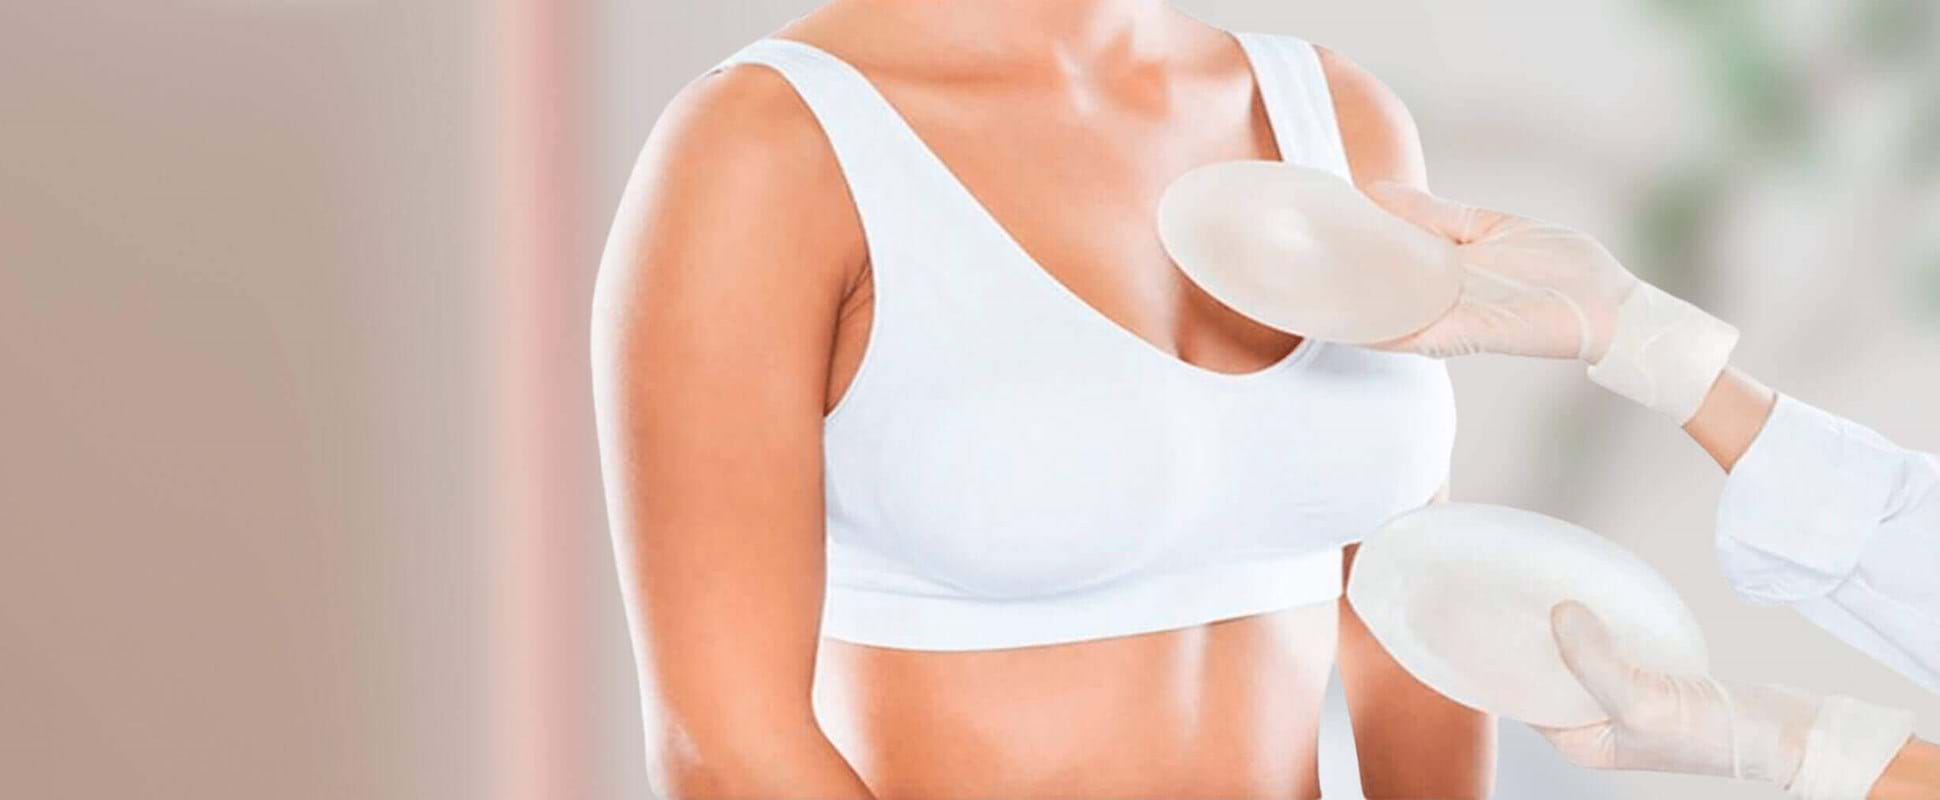 Sexy Chest Woman Mammologist Silicone Implants Stock Photo